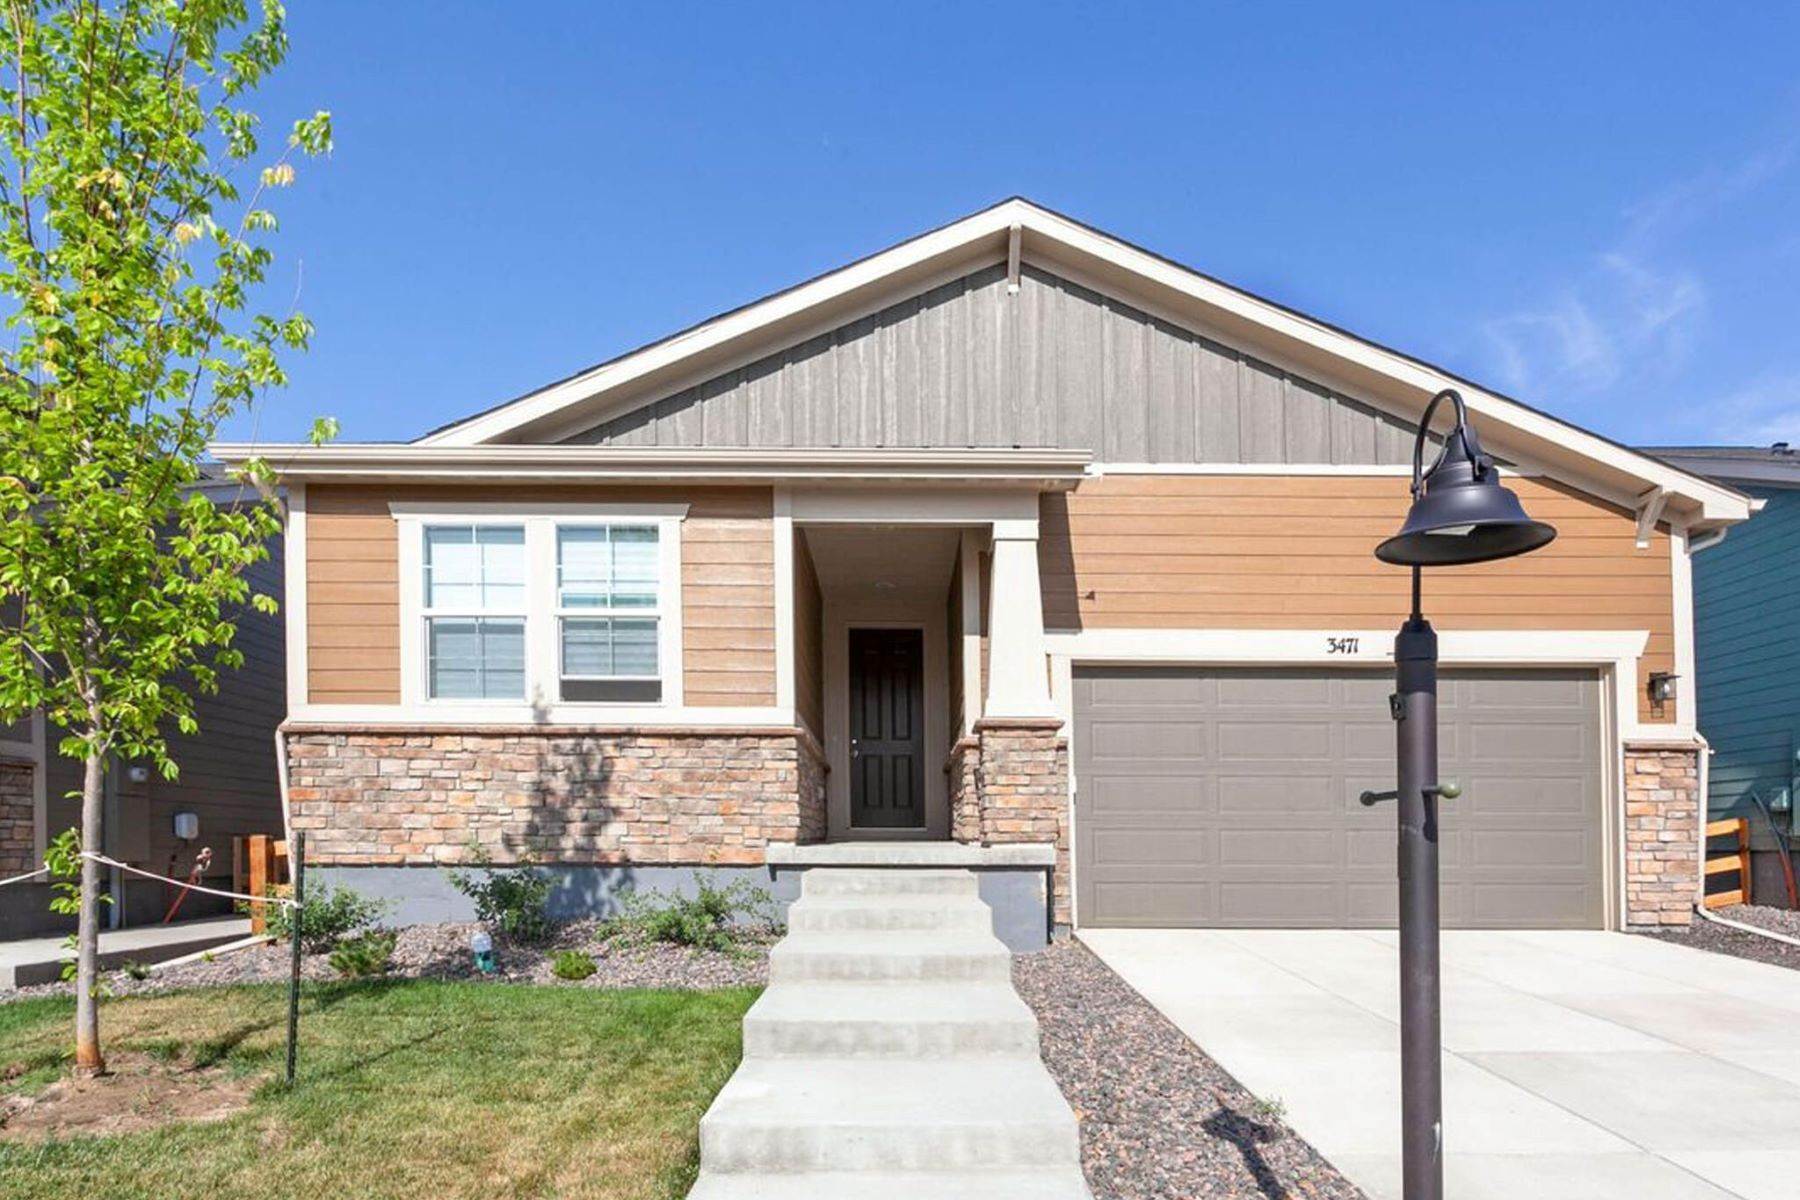 Single Family Homes for Active at Stunning single family home situated in a highly sought-after location! 3471 Ralston Creek Drive Loveland, Colorado 80538 United States